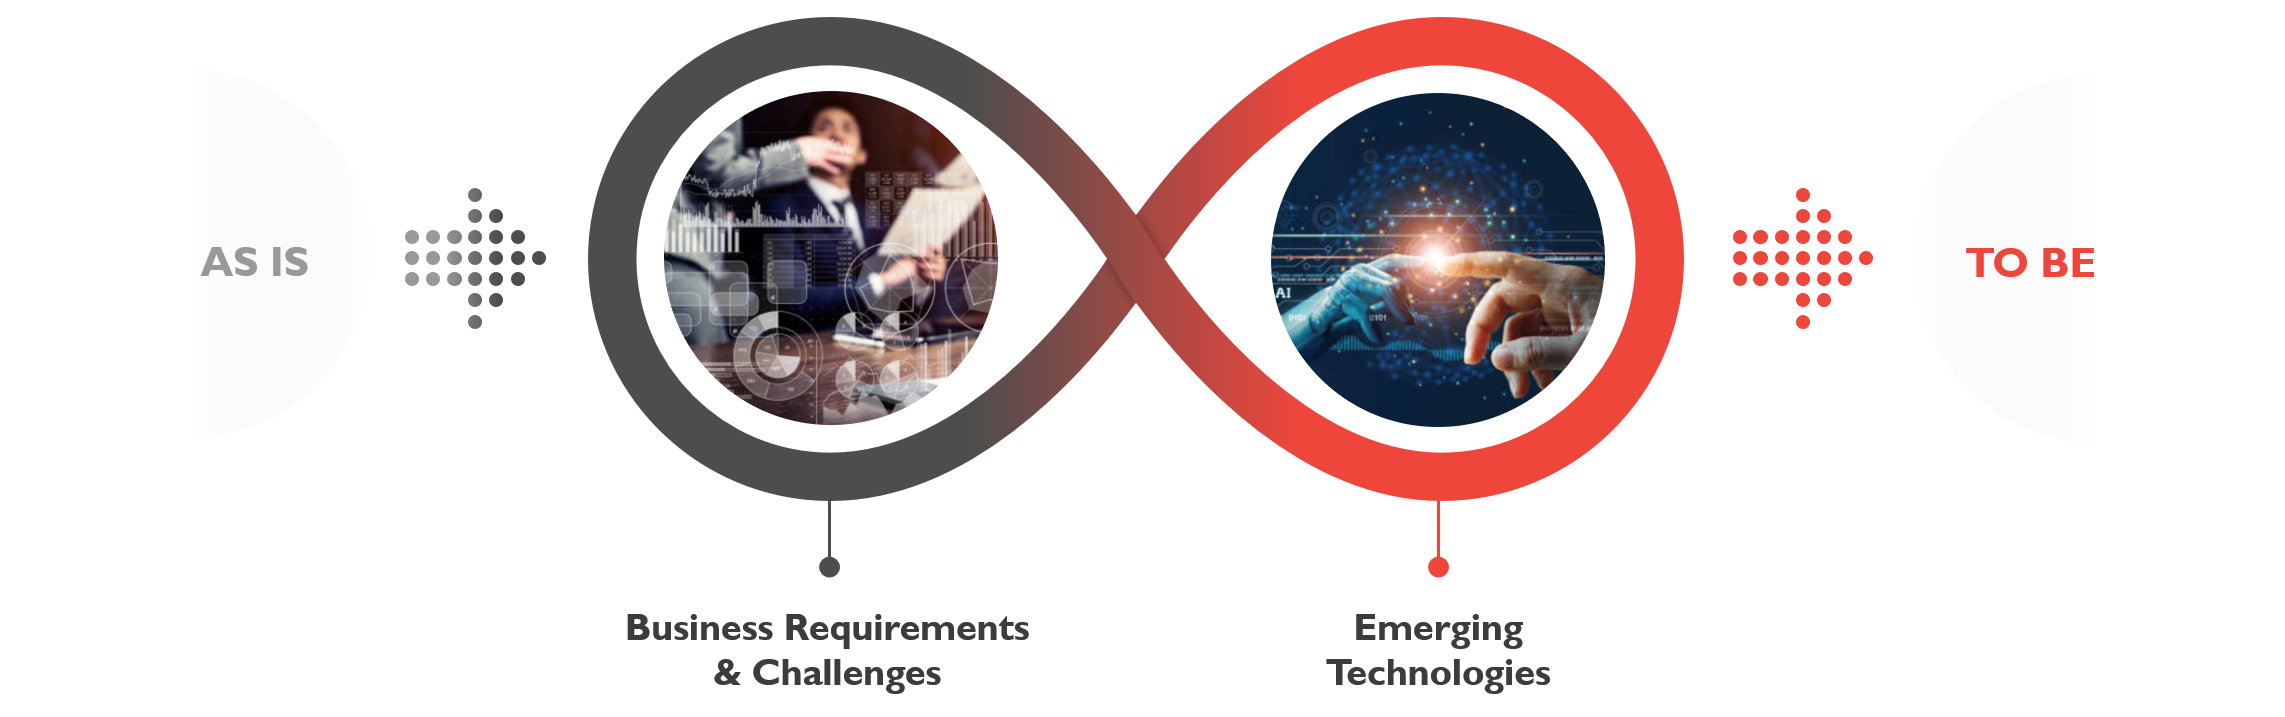 Infinity lifecycles between Business Requirements-Challanges and Emerging Technologies